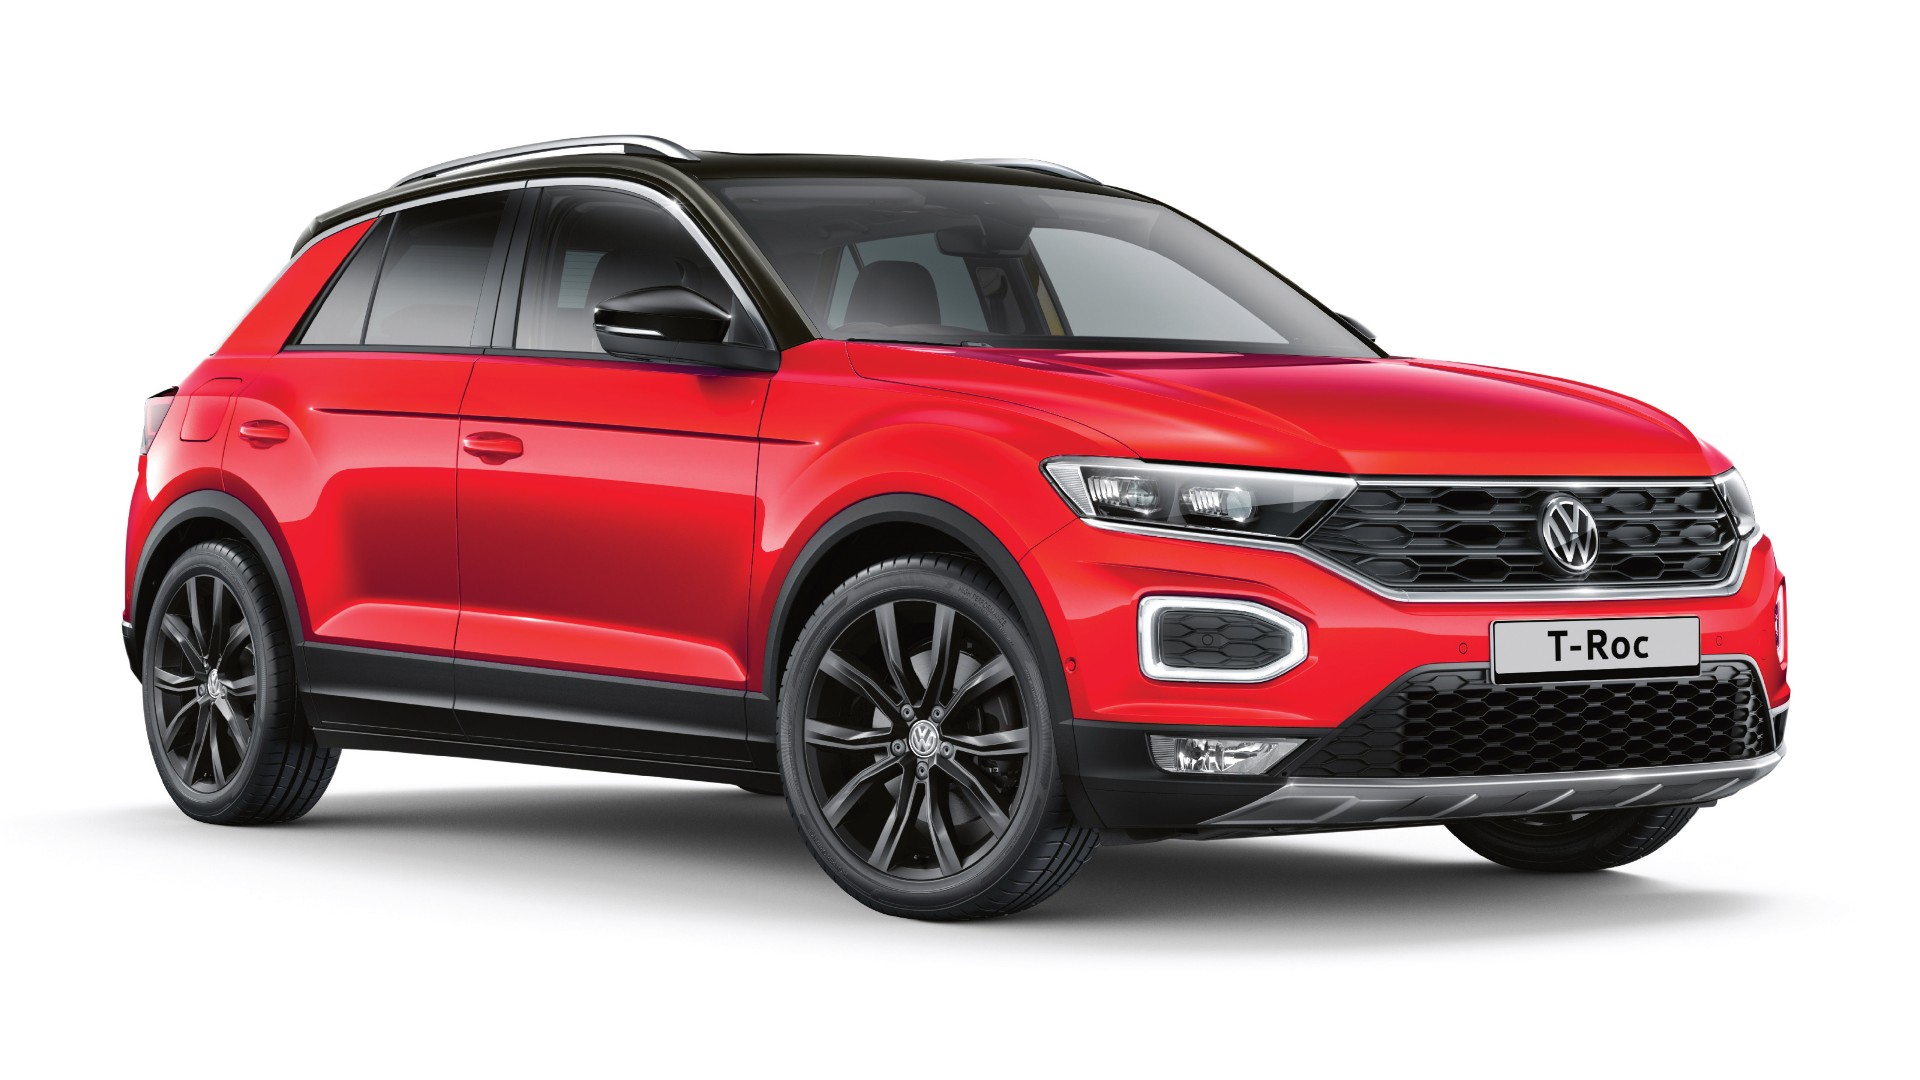 Volkswagen T-Roc 2021 1.5 TSI - Price in India, Mileage, Reviews, Colours,  Specification, Images - Overdrive